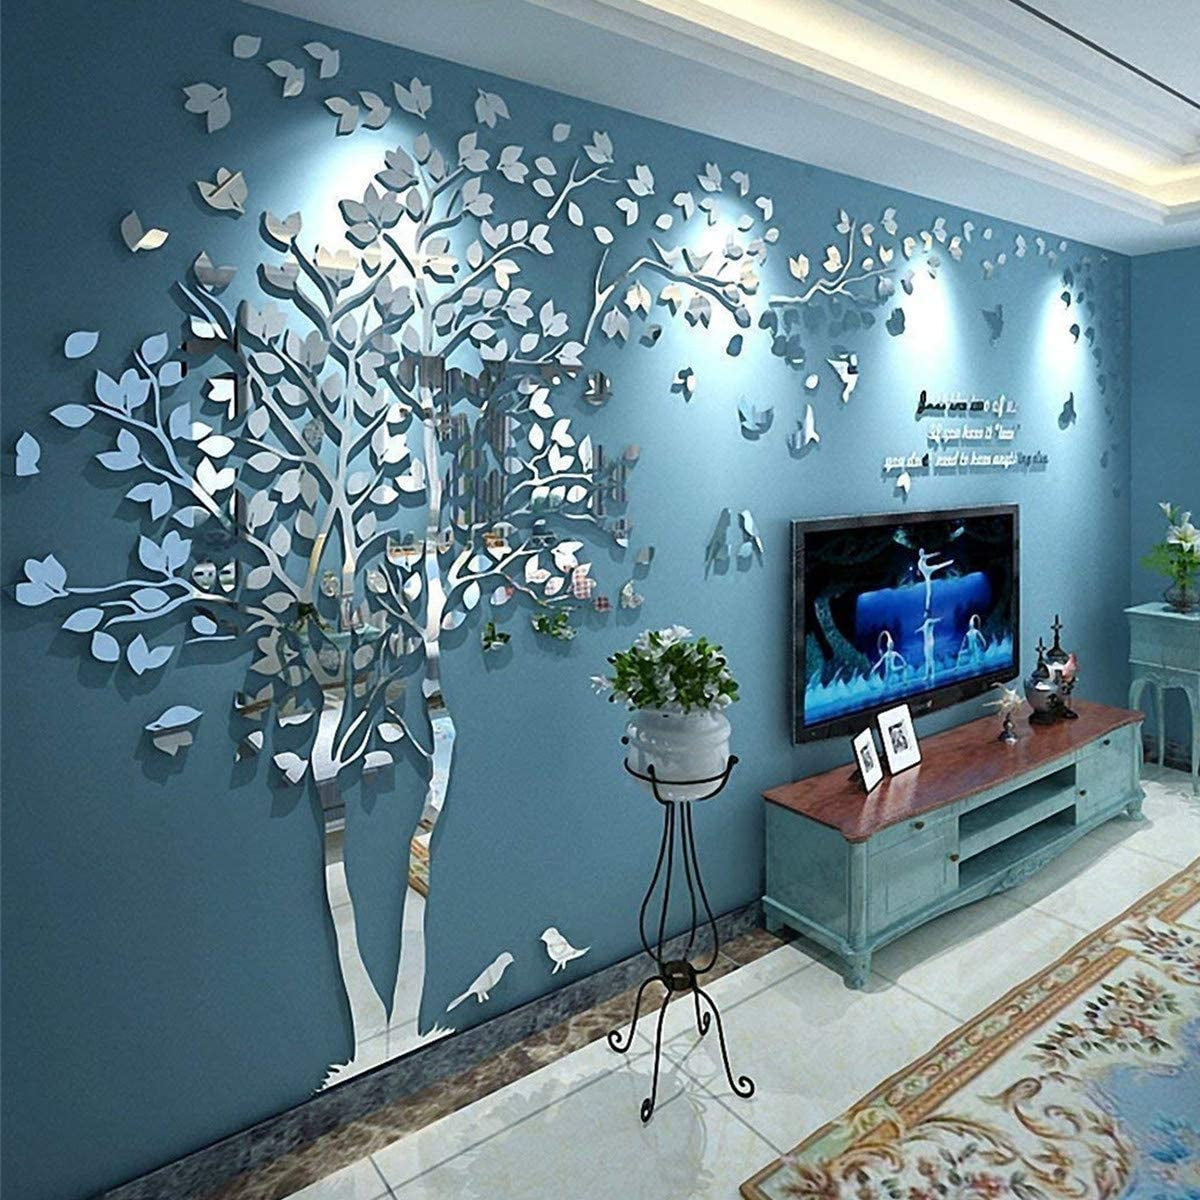 3D DIY Tree Wall Sticker Large Family Bird and Tree Wall Decal Art Mural Stickers Home Decor for Living Room Bedroom Nursery Kindergarten Home Decoration TV Backdrop Wall